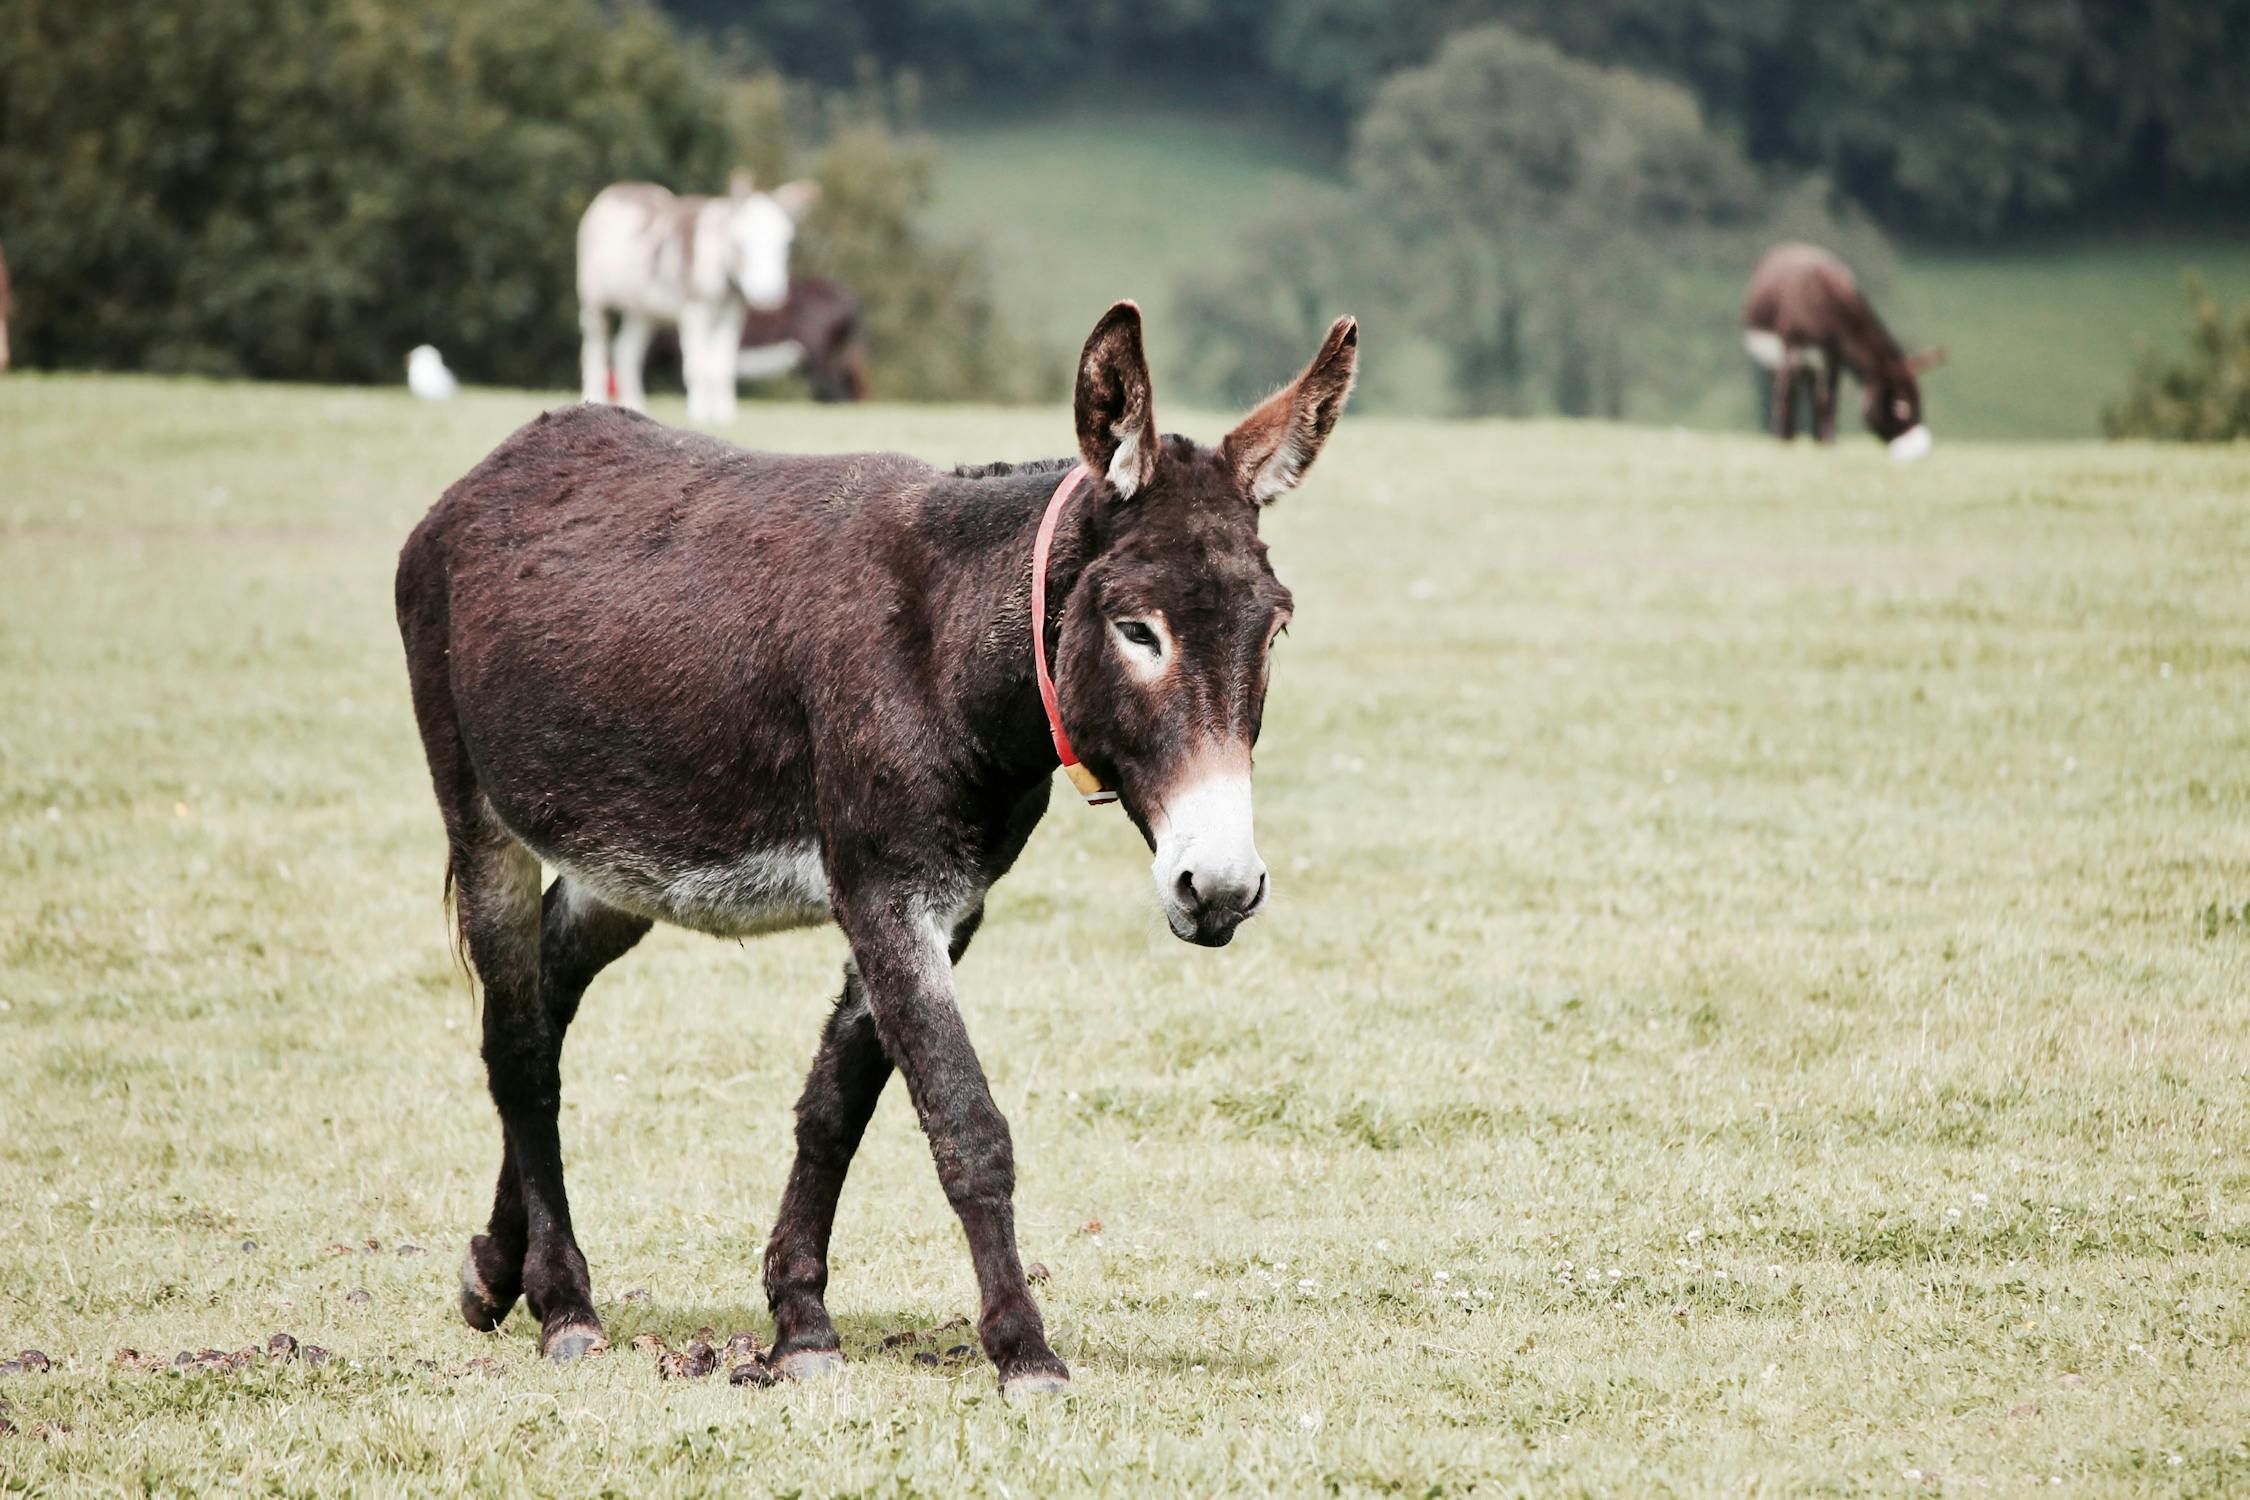 Donkey Photo by Leon Woods from Pexels